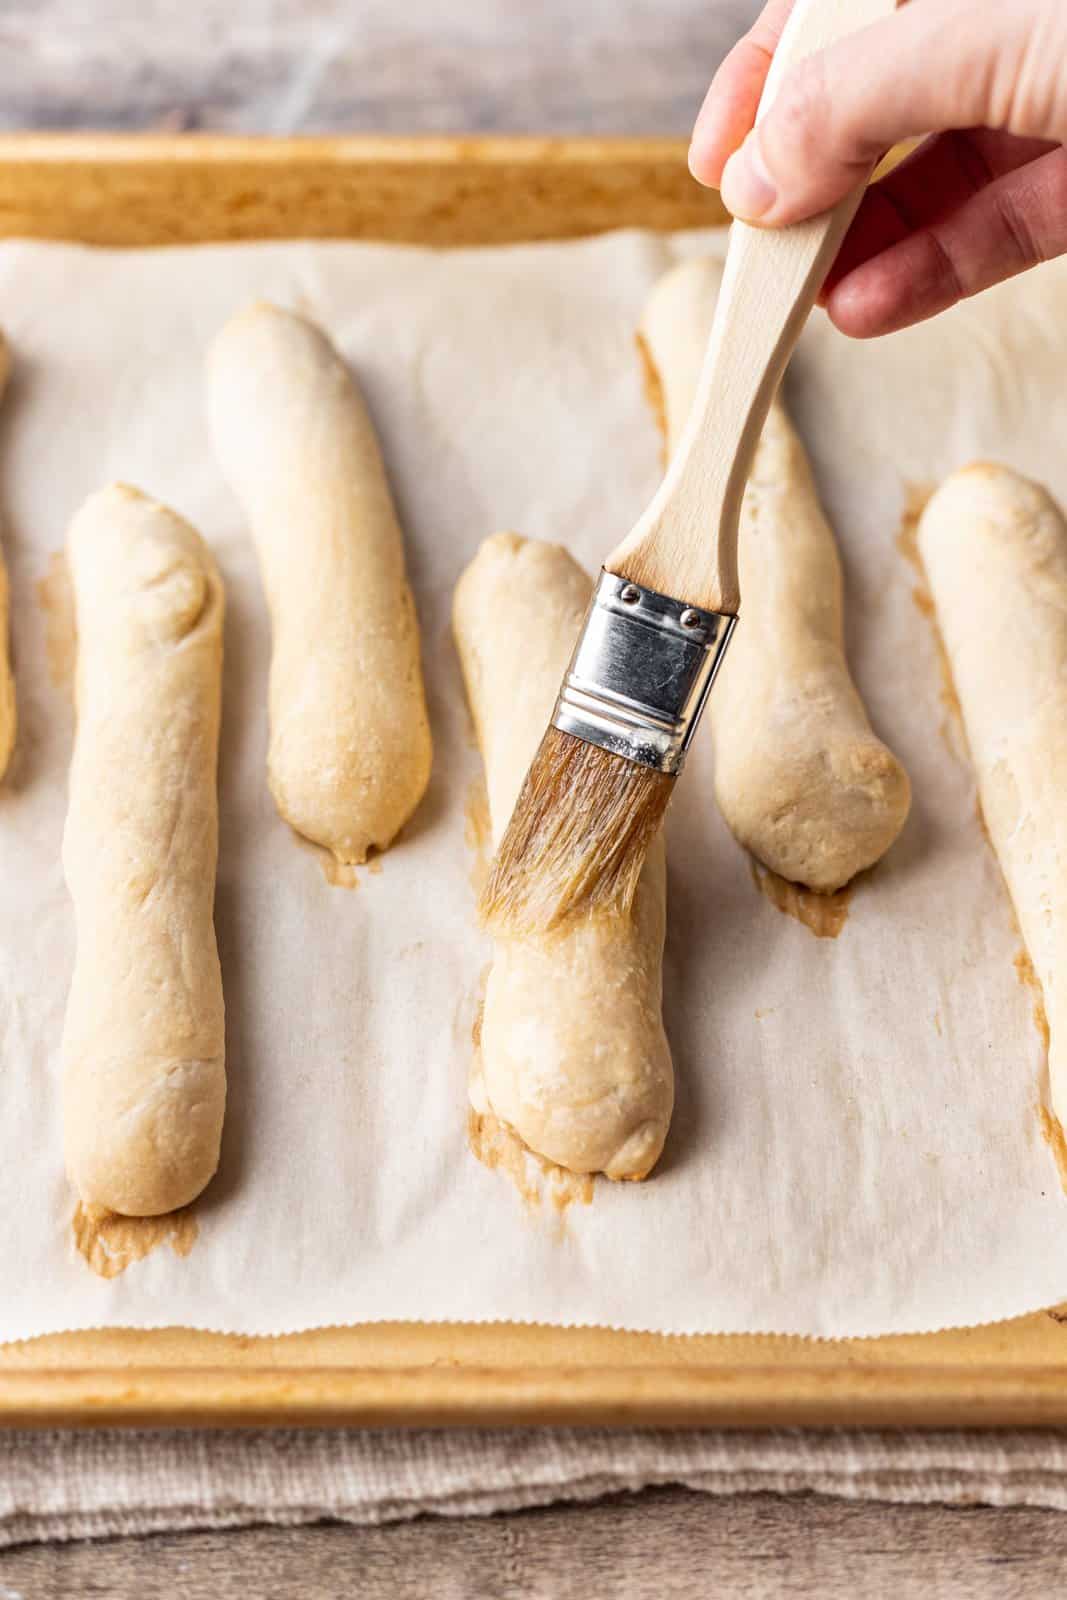 Breadsticks being brushed with a butter and garlic powder mixture.